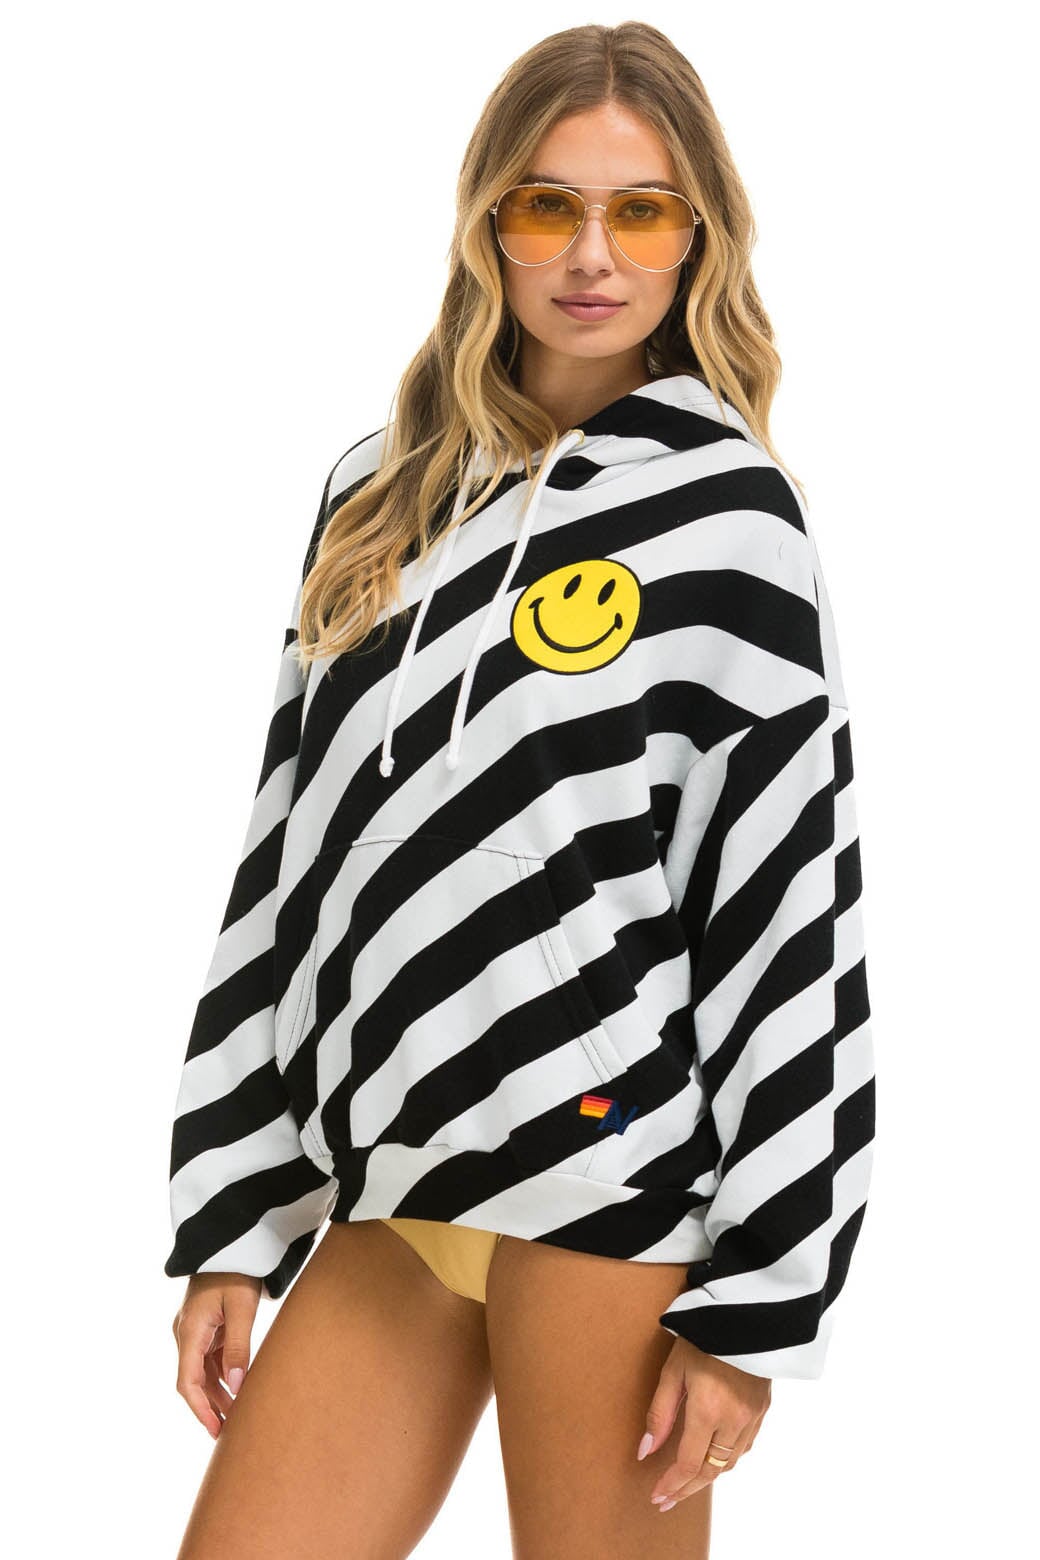 CAUTION SMILEY 2 EMBRIODERY RELAXED PULLOVER HOODIE - WHITE // BLACK Hoodie Aviator Nation 